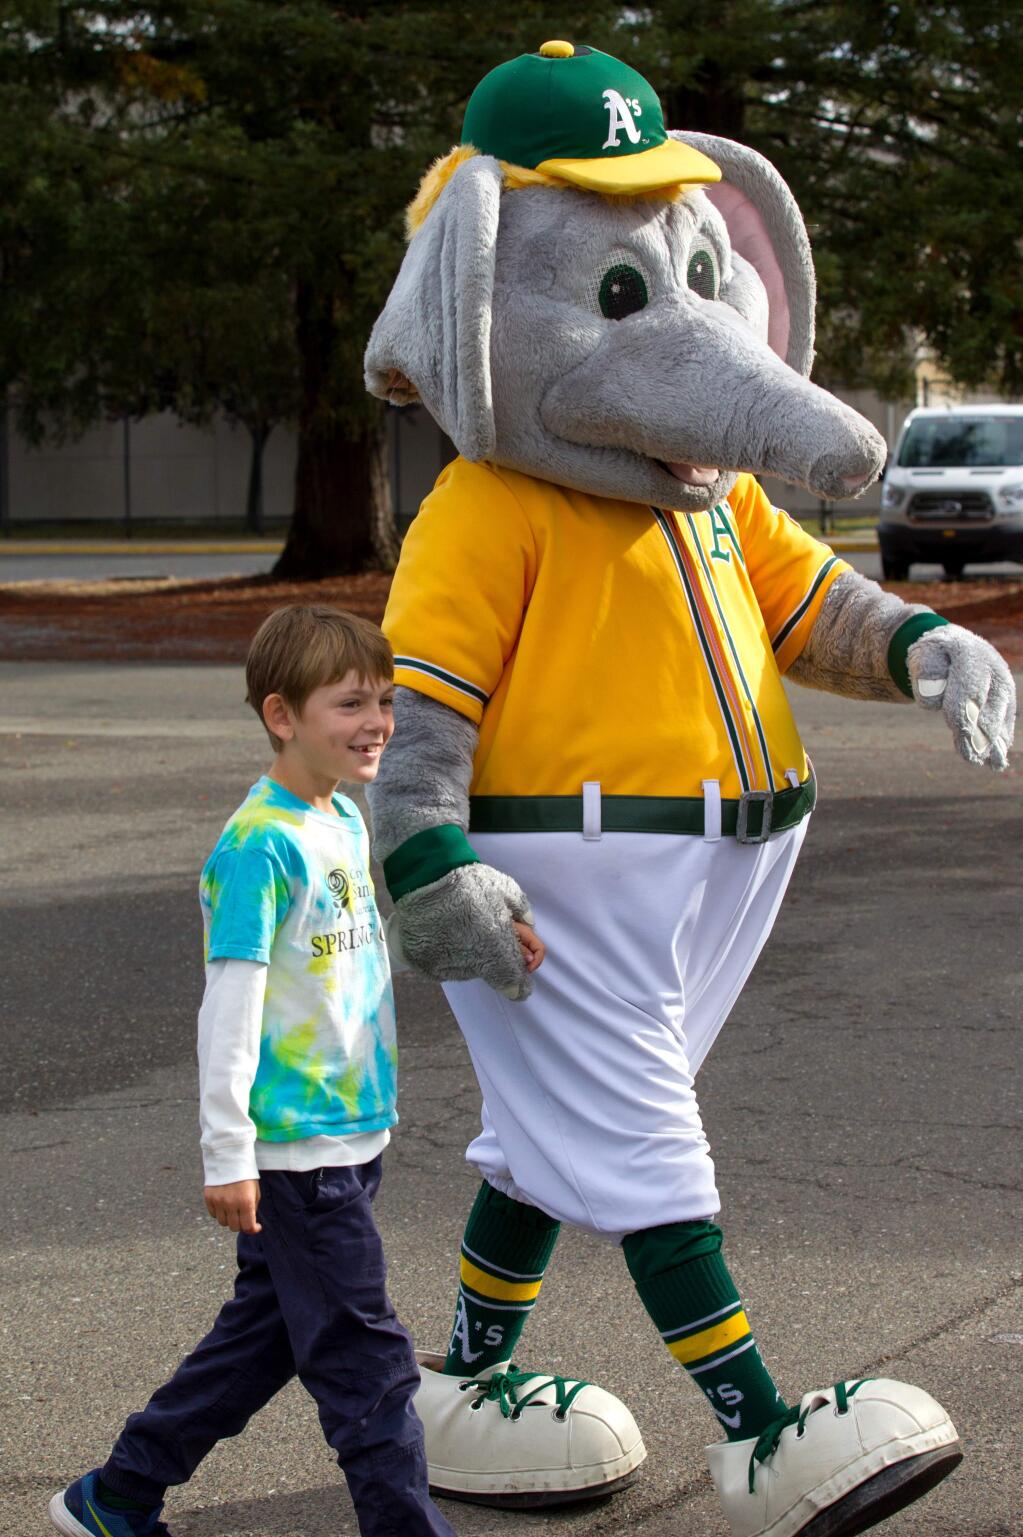 Loren Jade Smith, 9, of Santa Rosa, walks with 'Stomper,' the A's mascot, at Mark West Little League's fields in Santa Rosa on Friday, Oct. 20, 2017. Loren received gifts from the A's and others after he wrote a letter about losing his home and A's memorabilia in the fires. (Photo by Darryl Bush / For The Press Democrat)